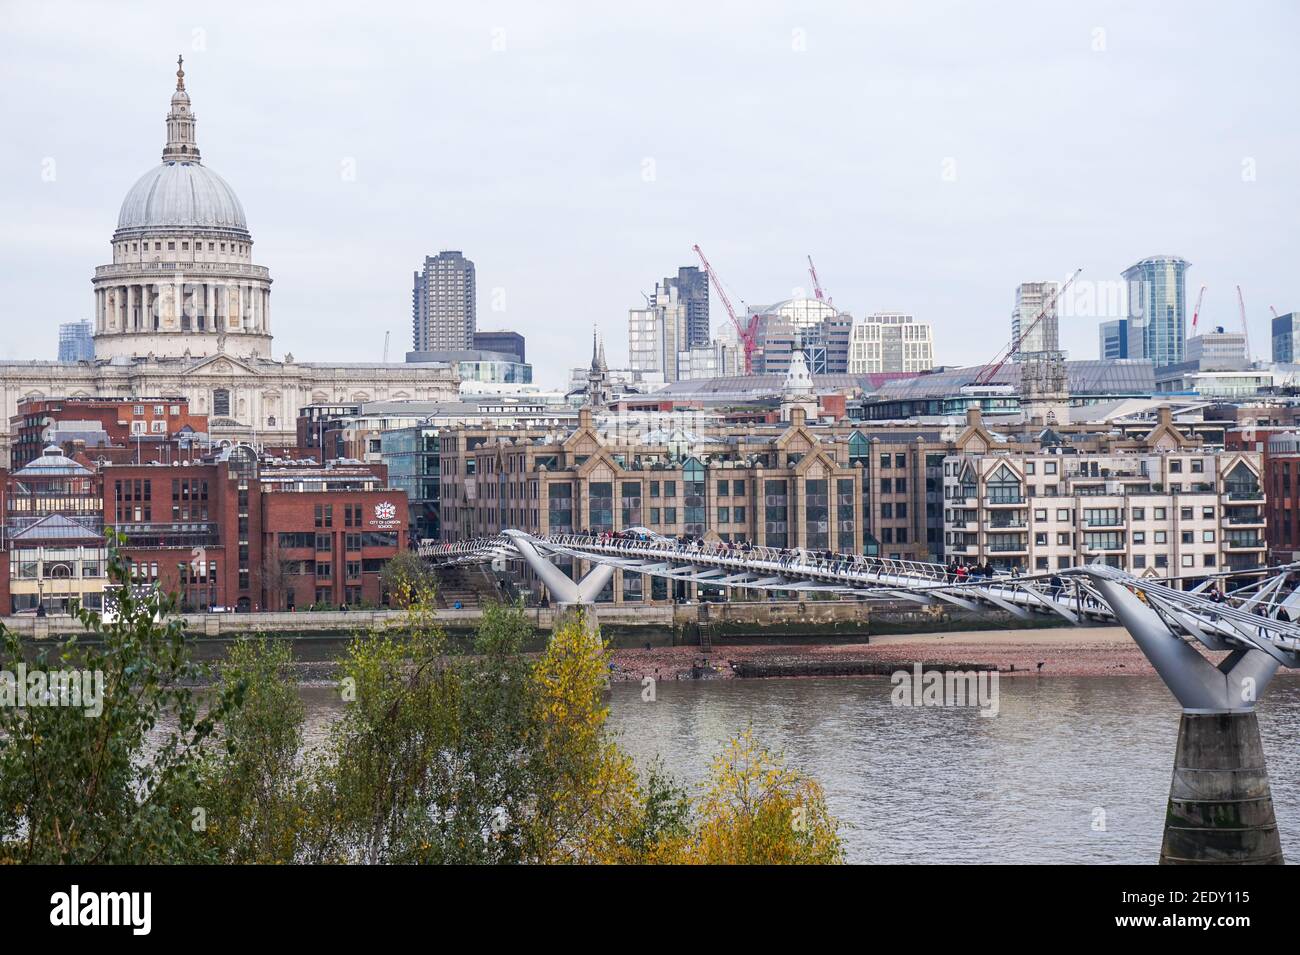 St. Paul's cathedral, View from Tate Modern, Millennium Bridge Footbridge, River Thames in London Stock Photo